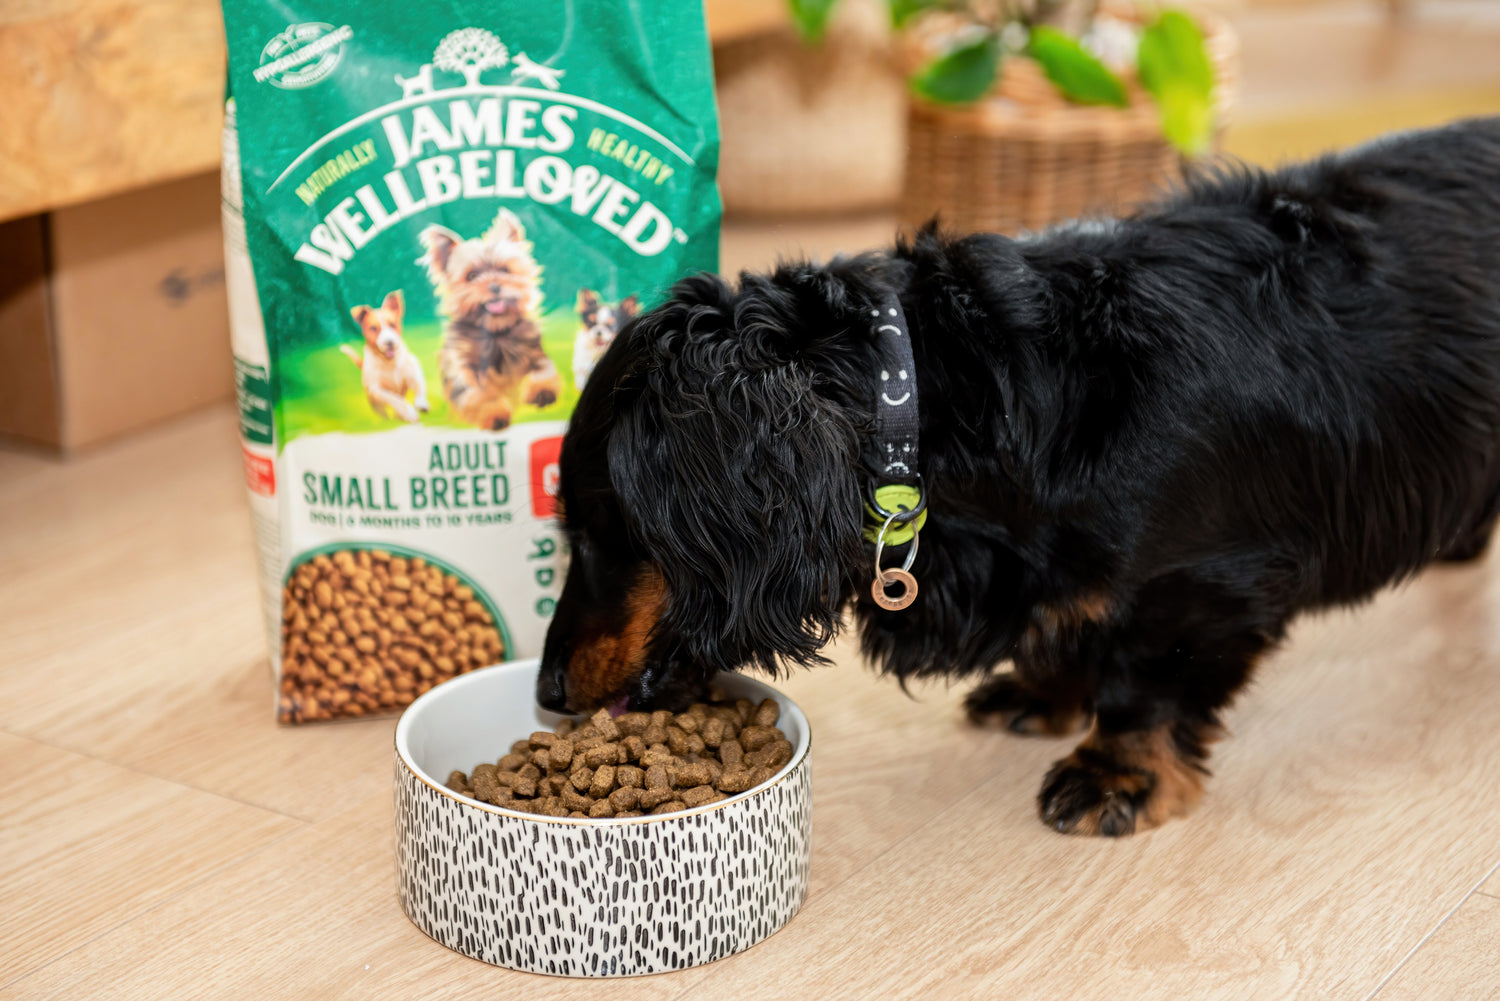 Adult small breed food